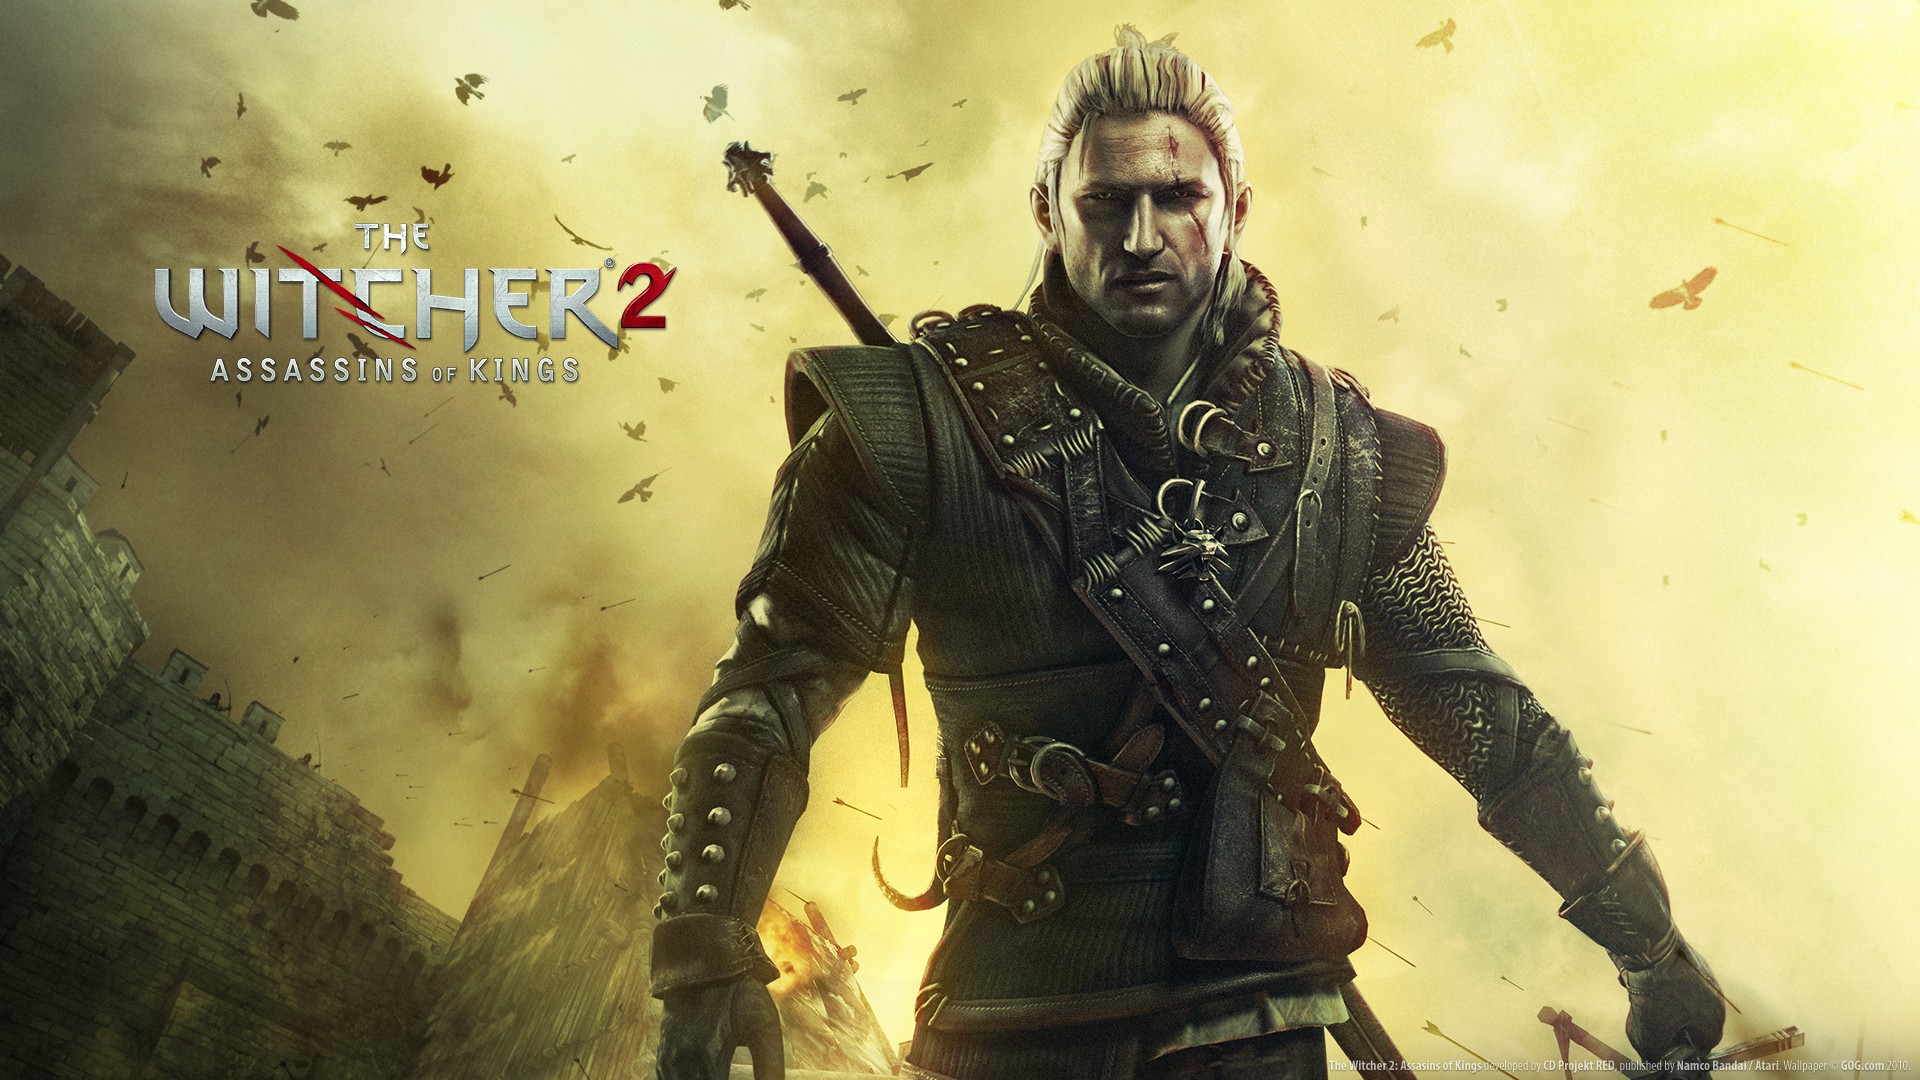 General 1920x1080 The Witcher 2: Assassins of Kings Geralt of Rivia CD Projekt RED video games PC gaming video game men video game art